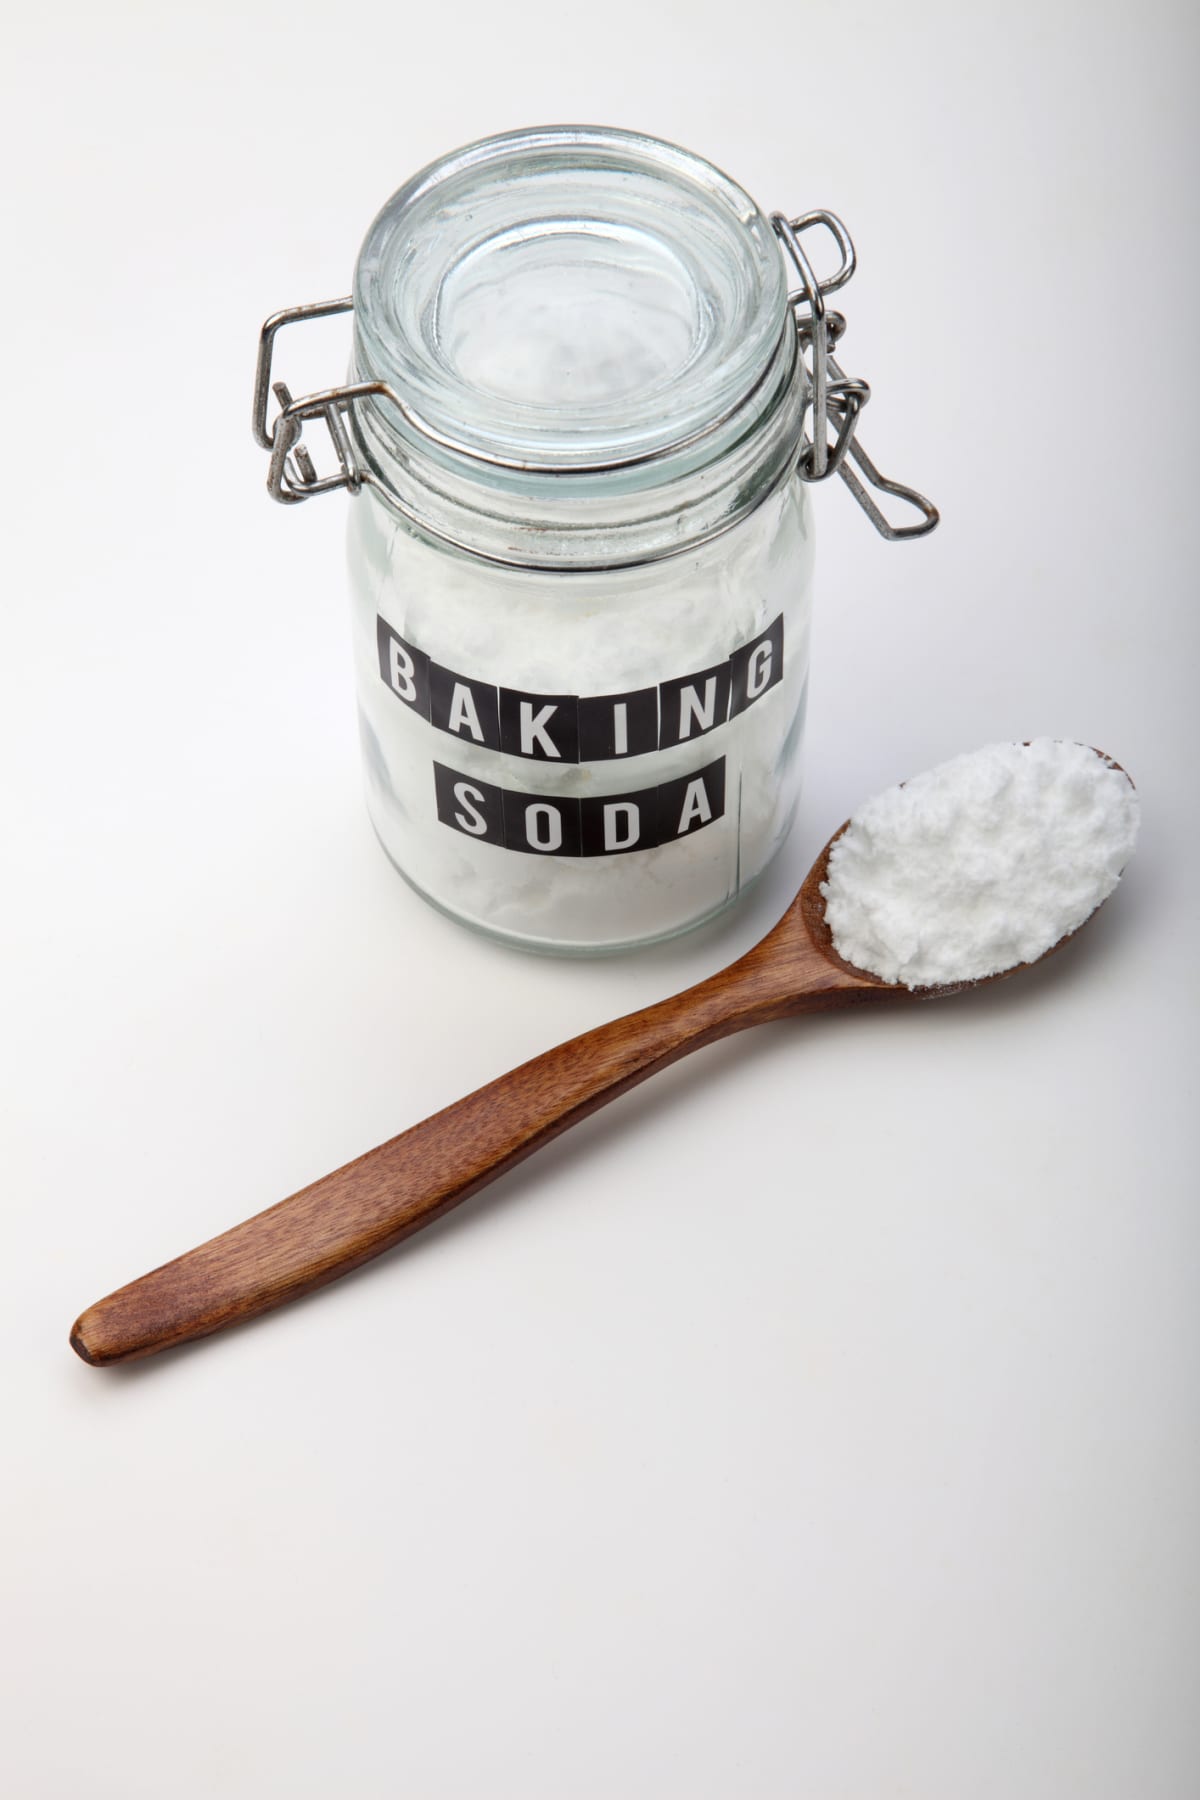 A jar of baking soda next to a spoon